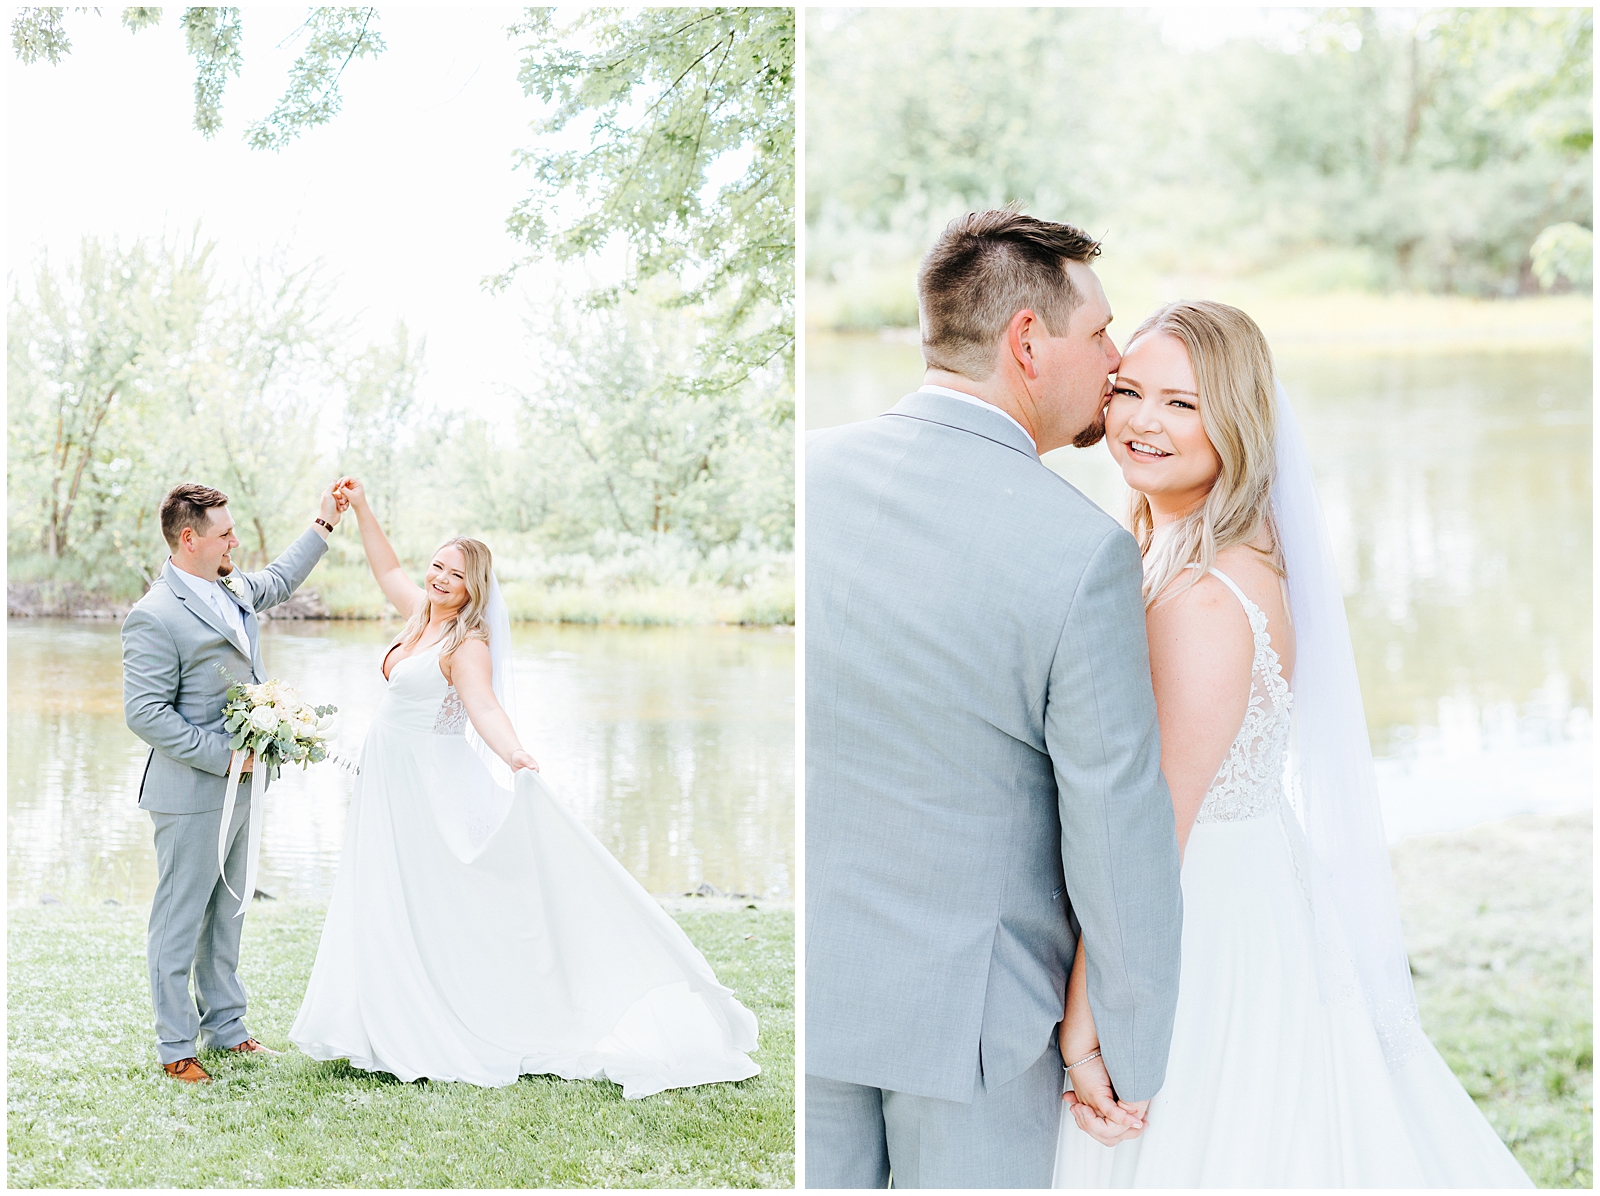 Bride and Groom Portraits at White Willow Estate Wedding Twirling in Dress